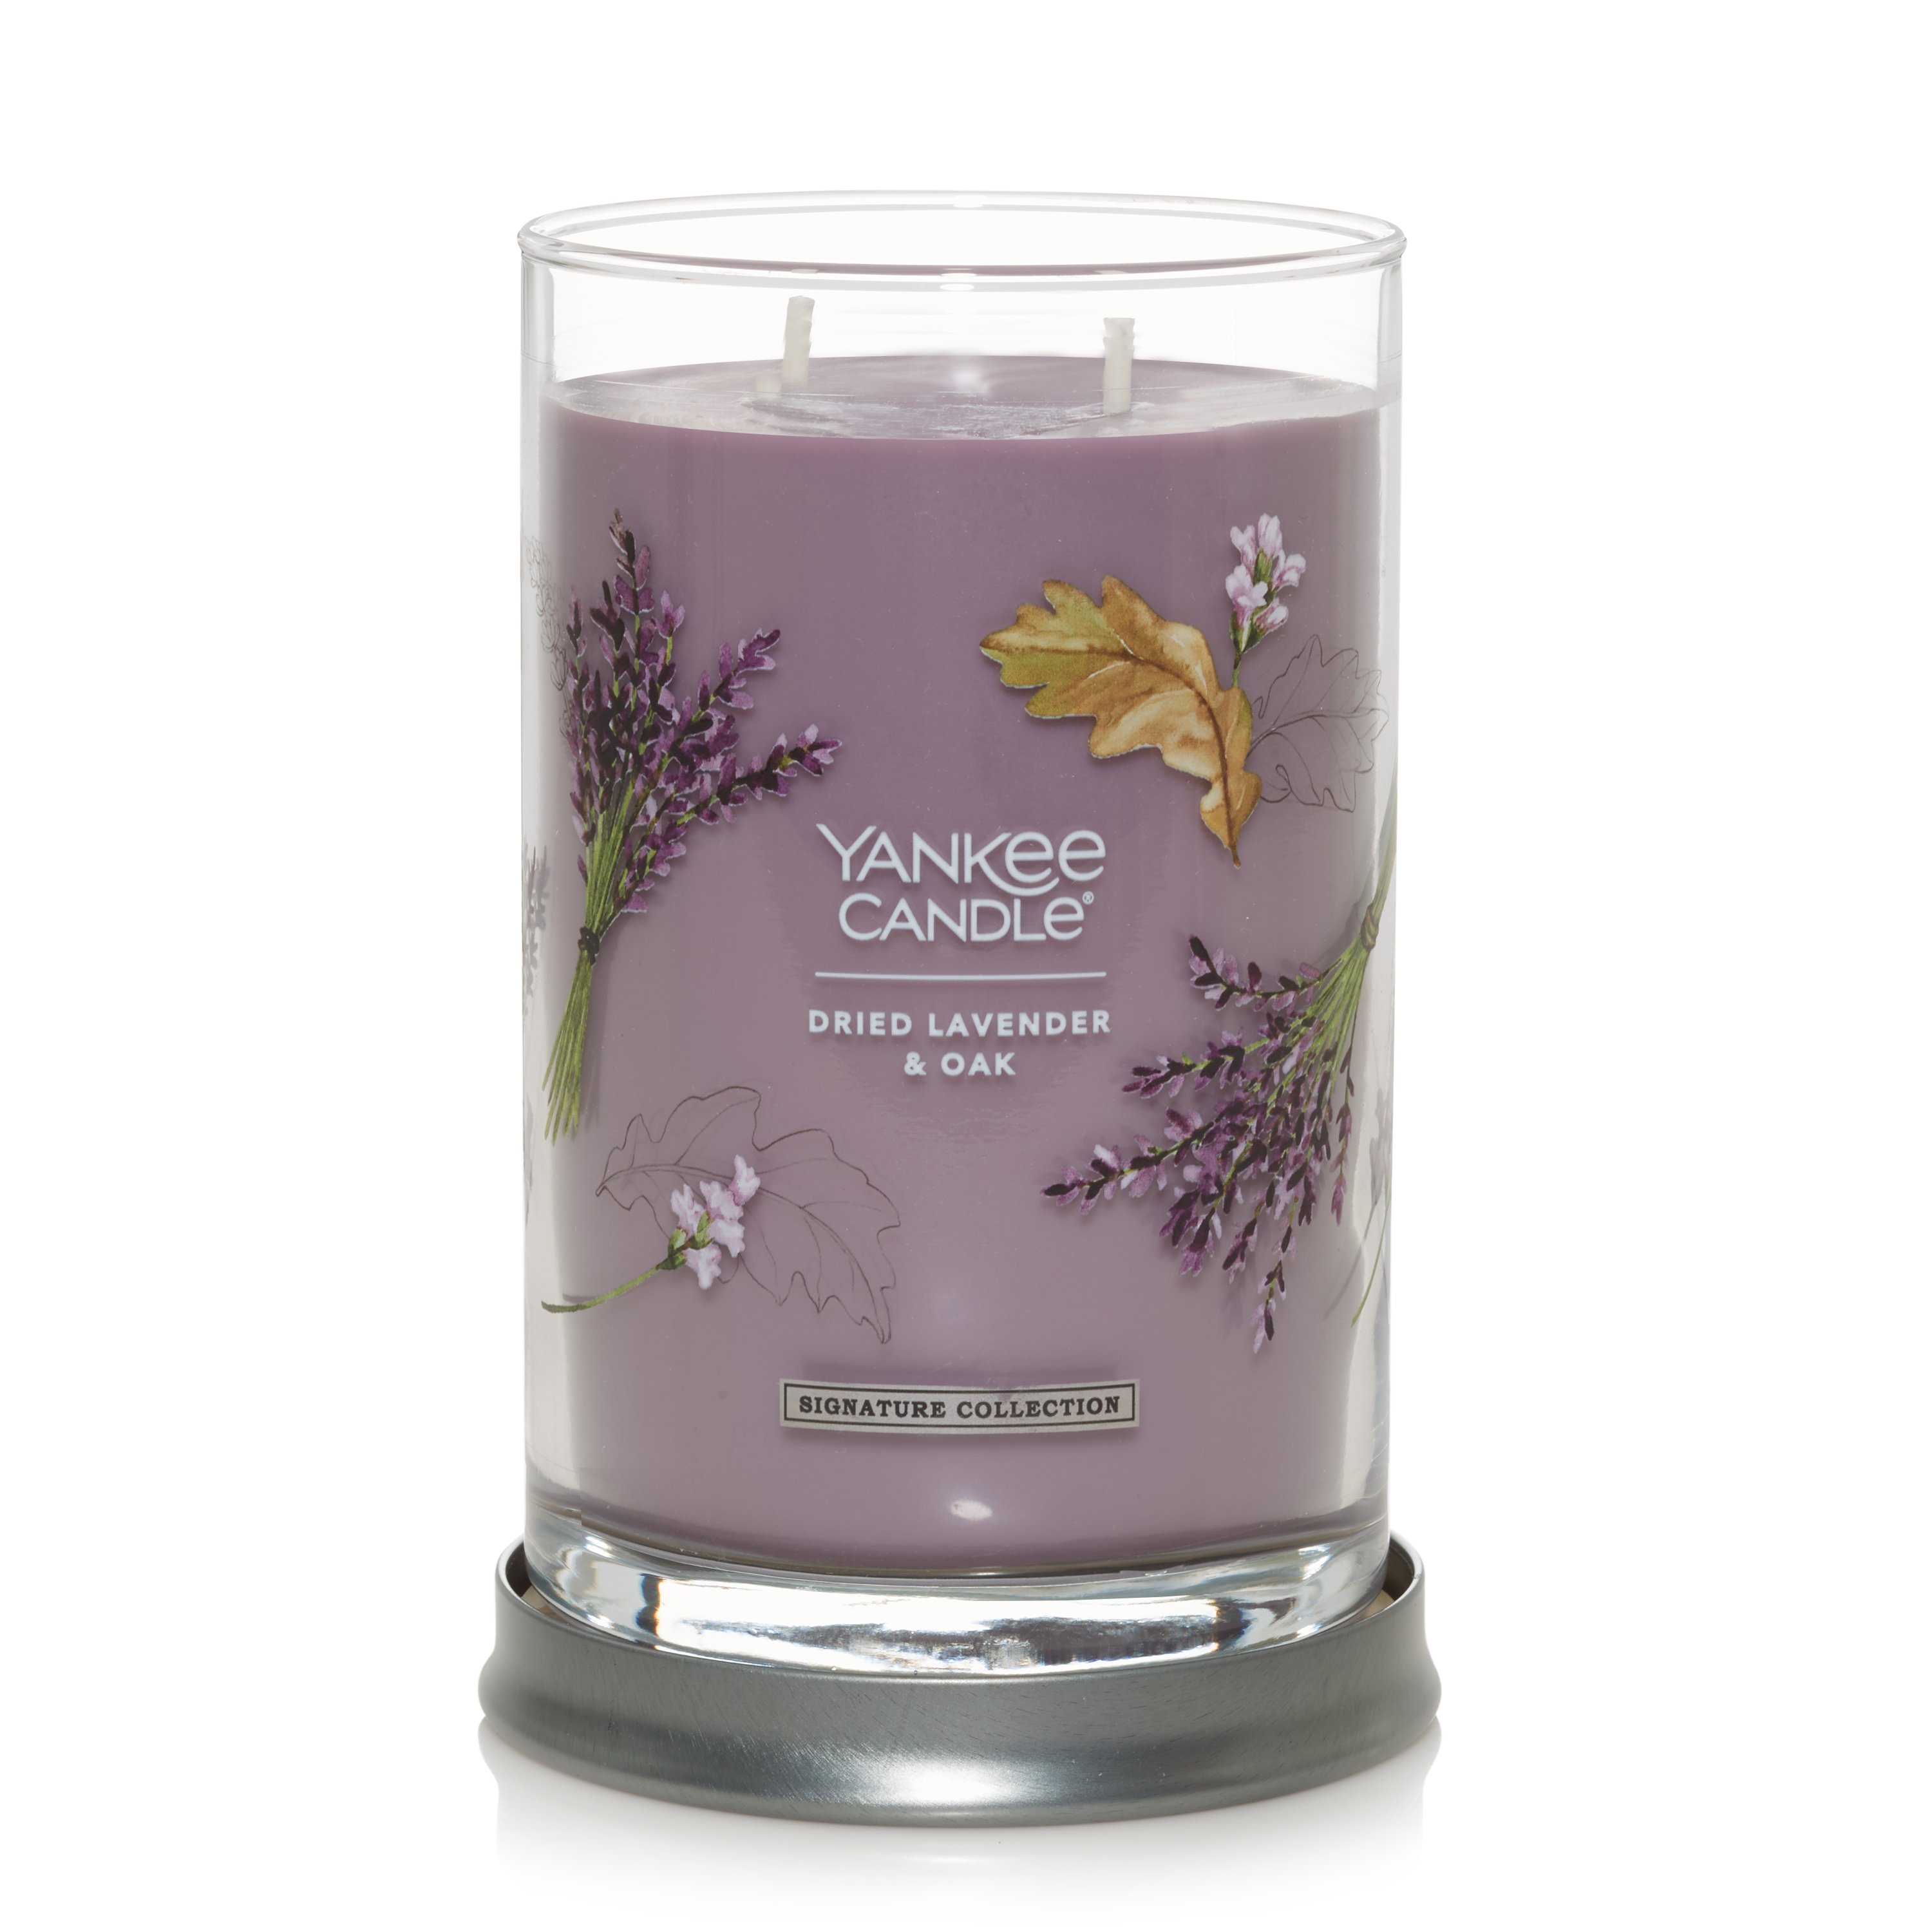 Yankee Candle Dried Lavender & Oak​ Signature Large Tumbler Candle, Purple, 1-Pieces - image 2 of 6